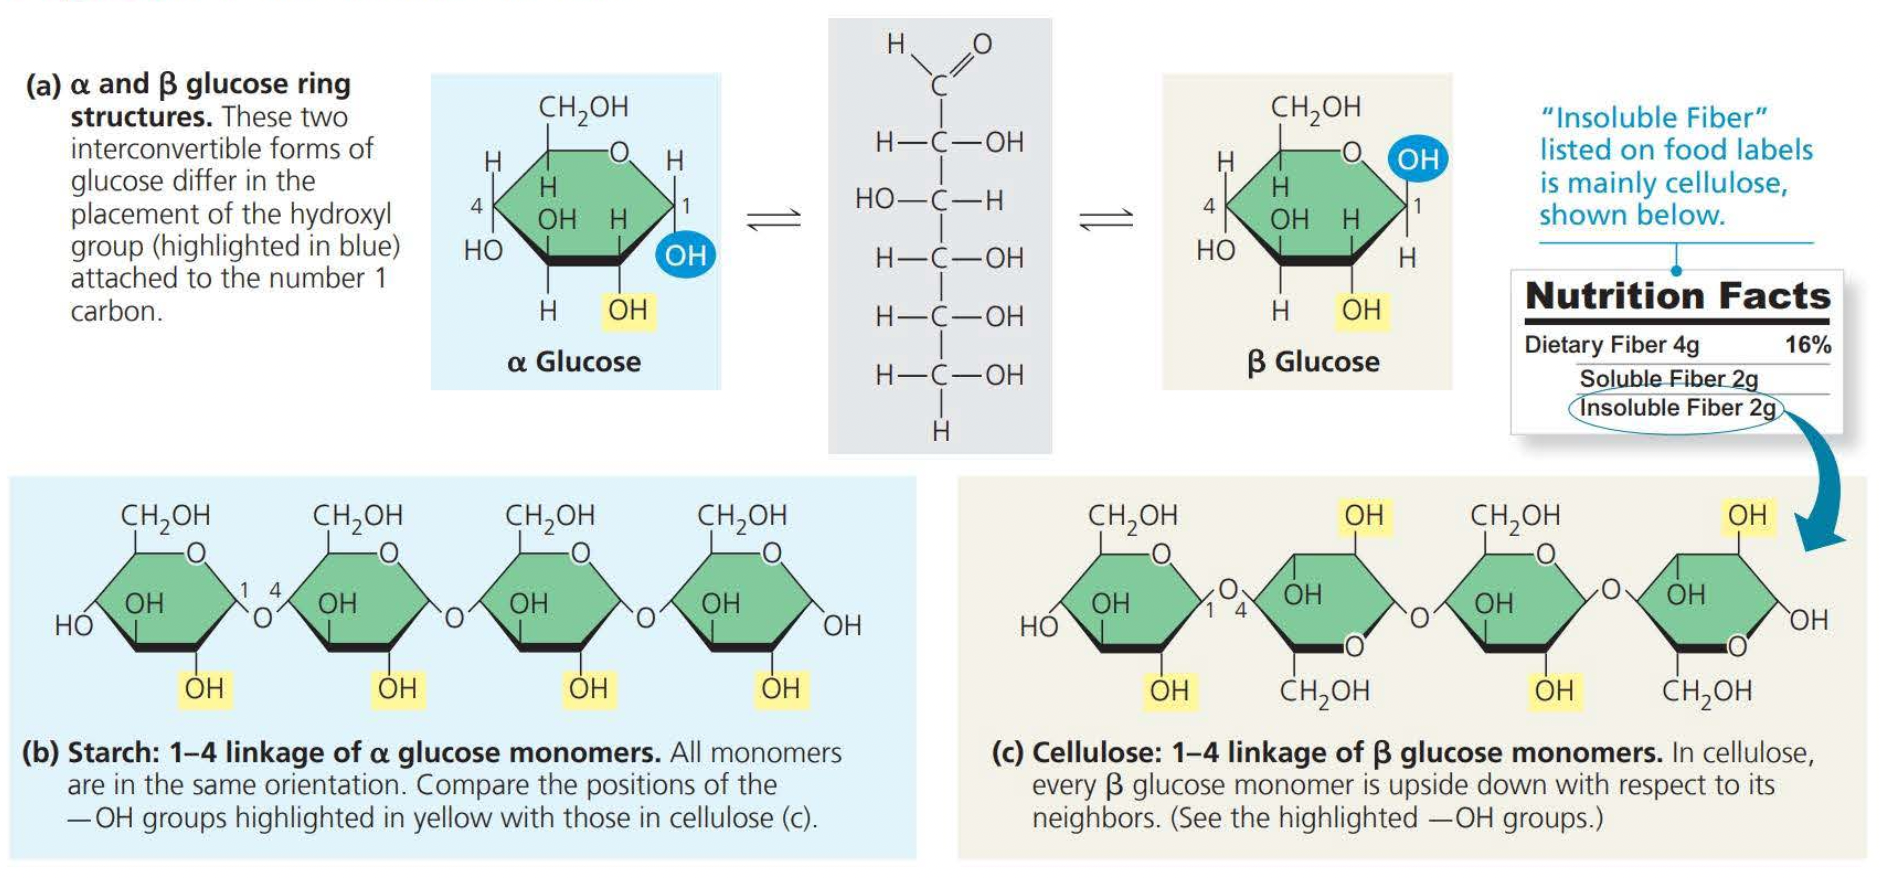 Pay careful attention to the orientation of the hydroxide groups on alpha glucose monomers and beta glucose monomers